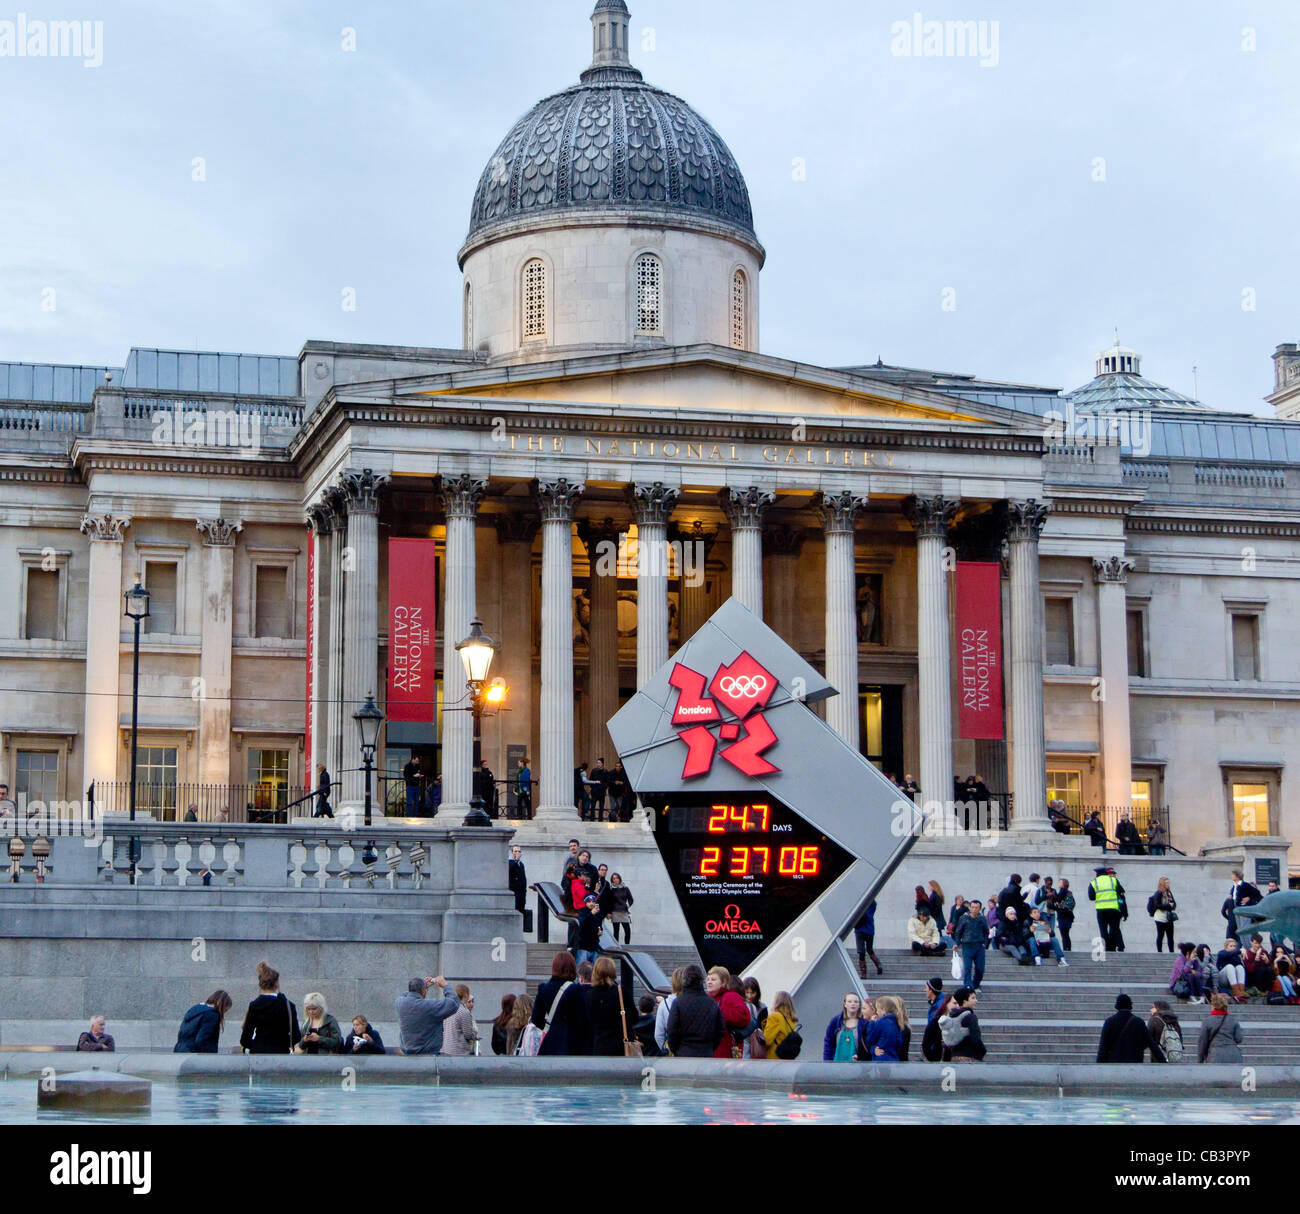 The official Olympic Countdown Clock in Trafalgar Square, London Stock Photo